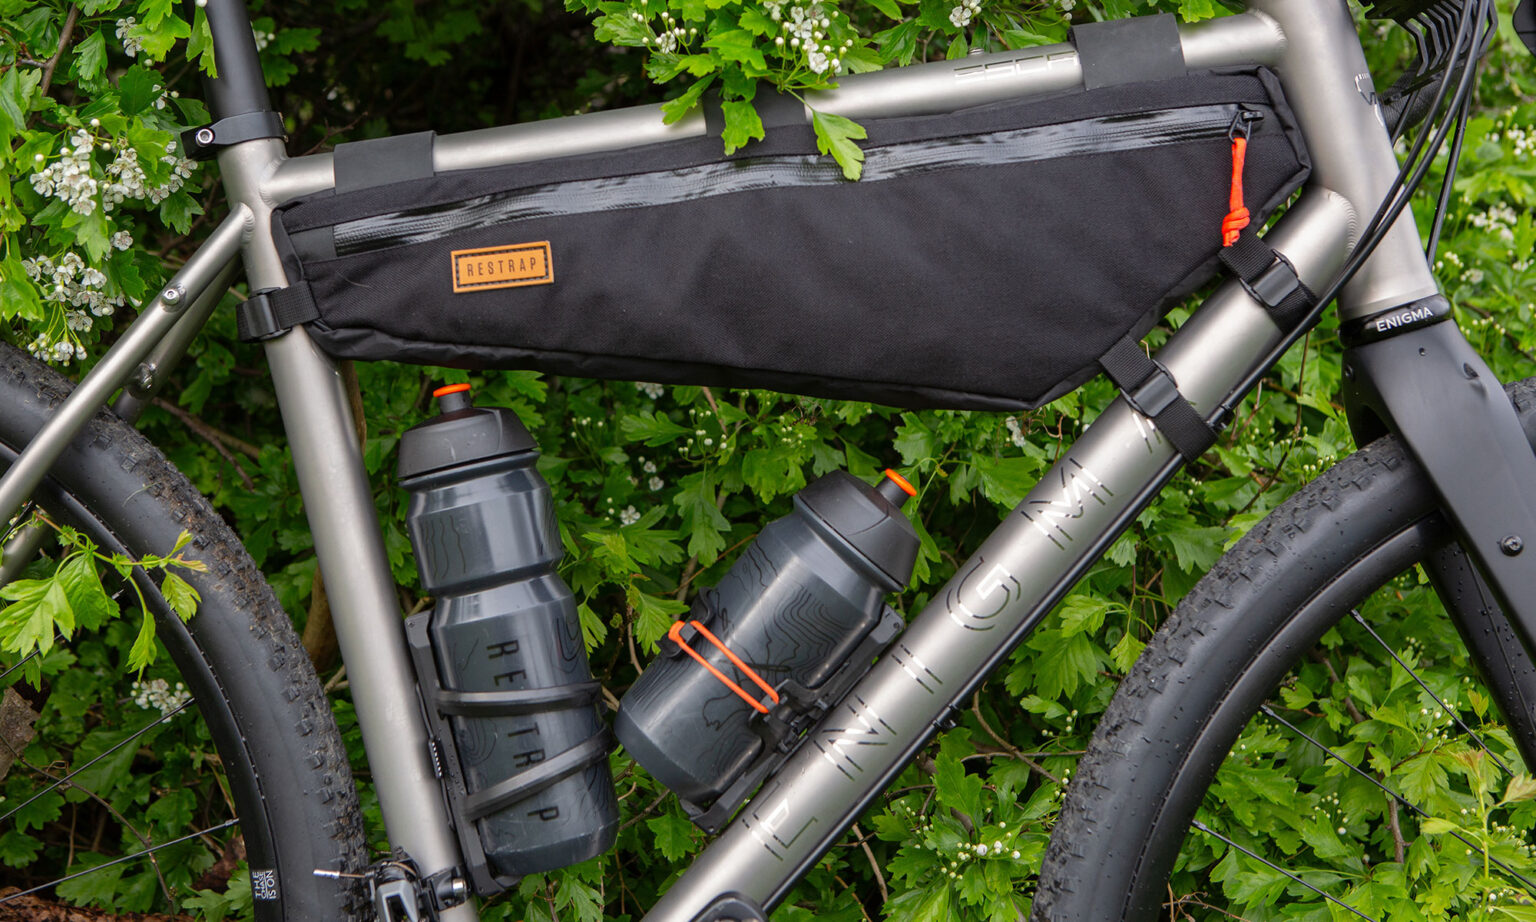 Restrap Side Release water bottle cages, loaded and secure on the bike